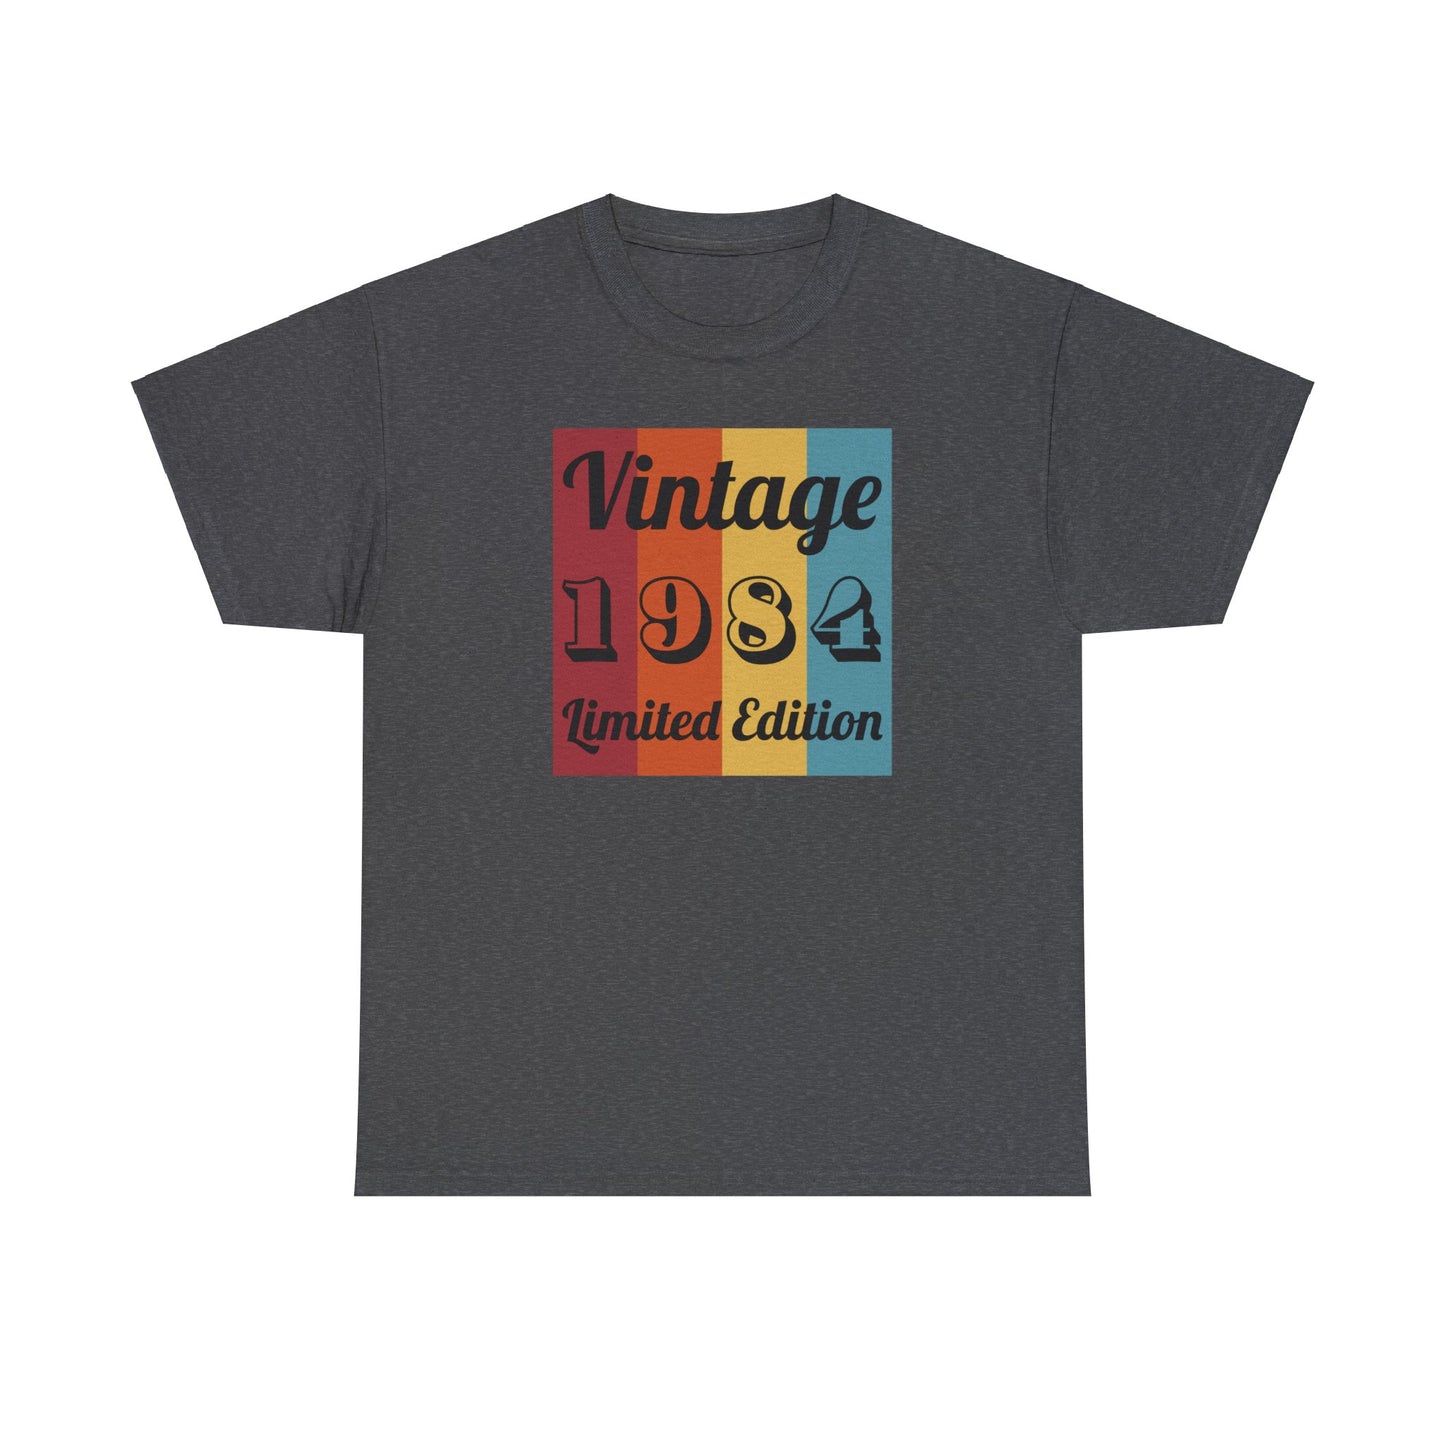 1984 T-Shirt For Vintage Limited Edition TShirt For Class Reunion Shirt For Birthday T Shirt For Birth Year Shirt For Graduation Year Shirt